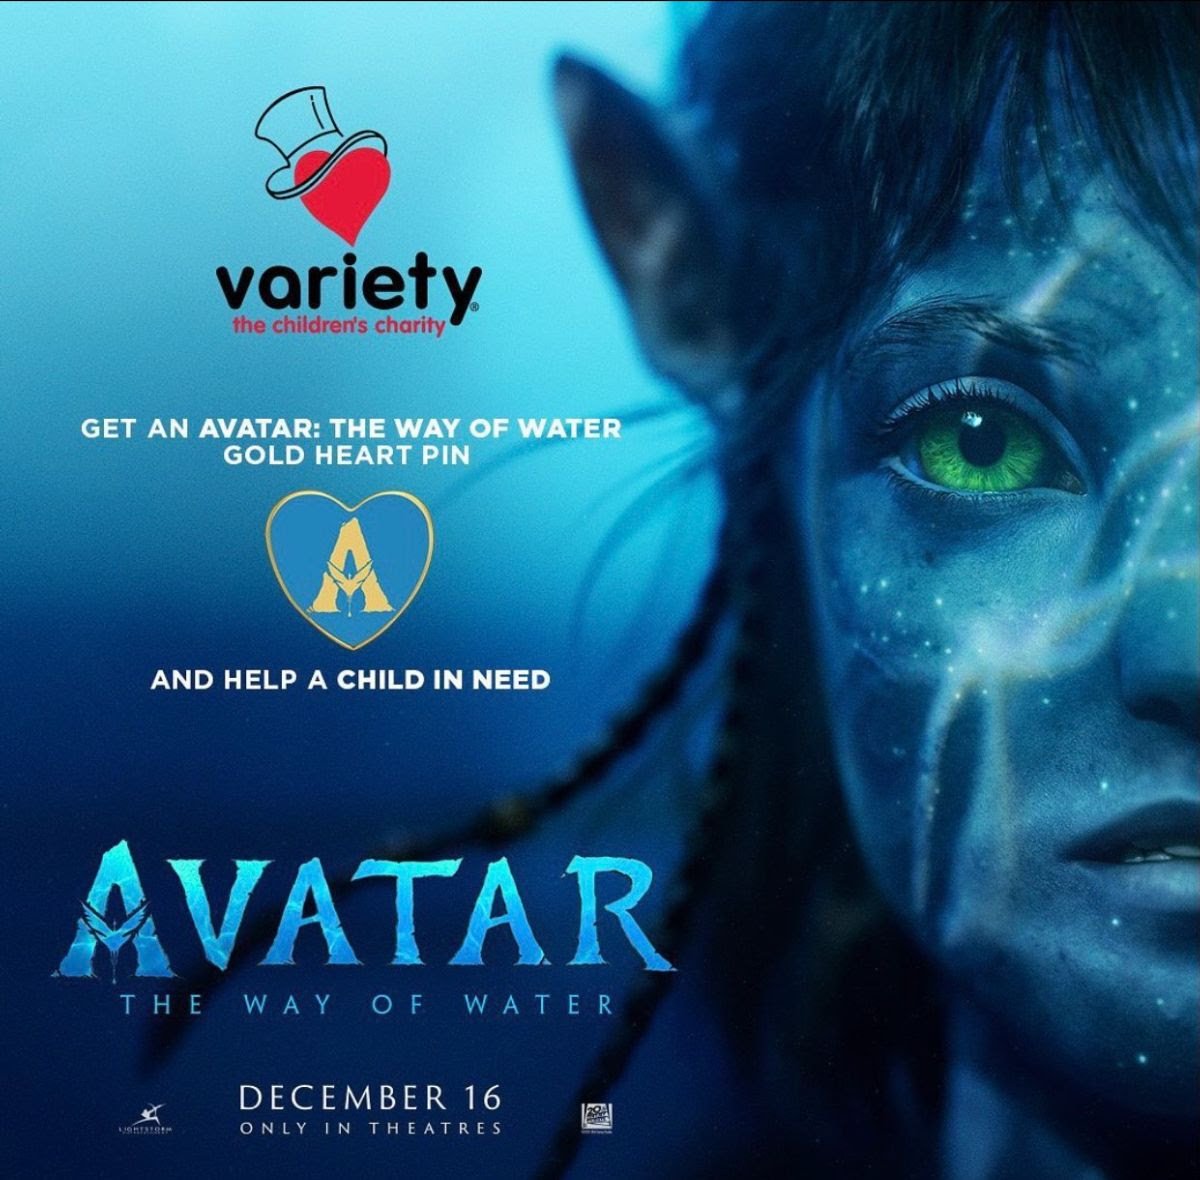 Avatar The Way of Water Gold Heart Pin for Variety the Children's Charity